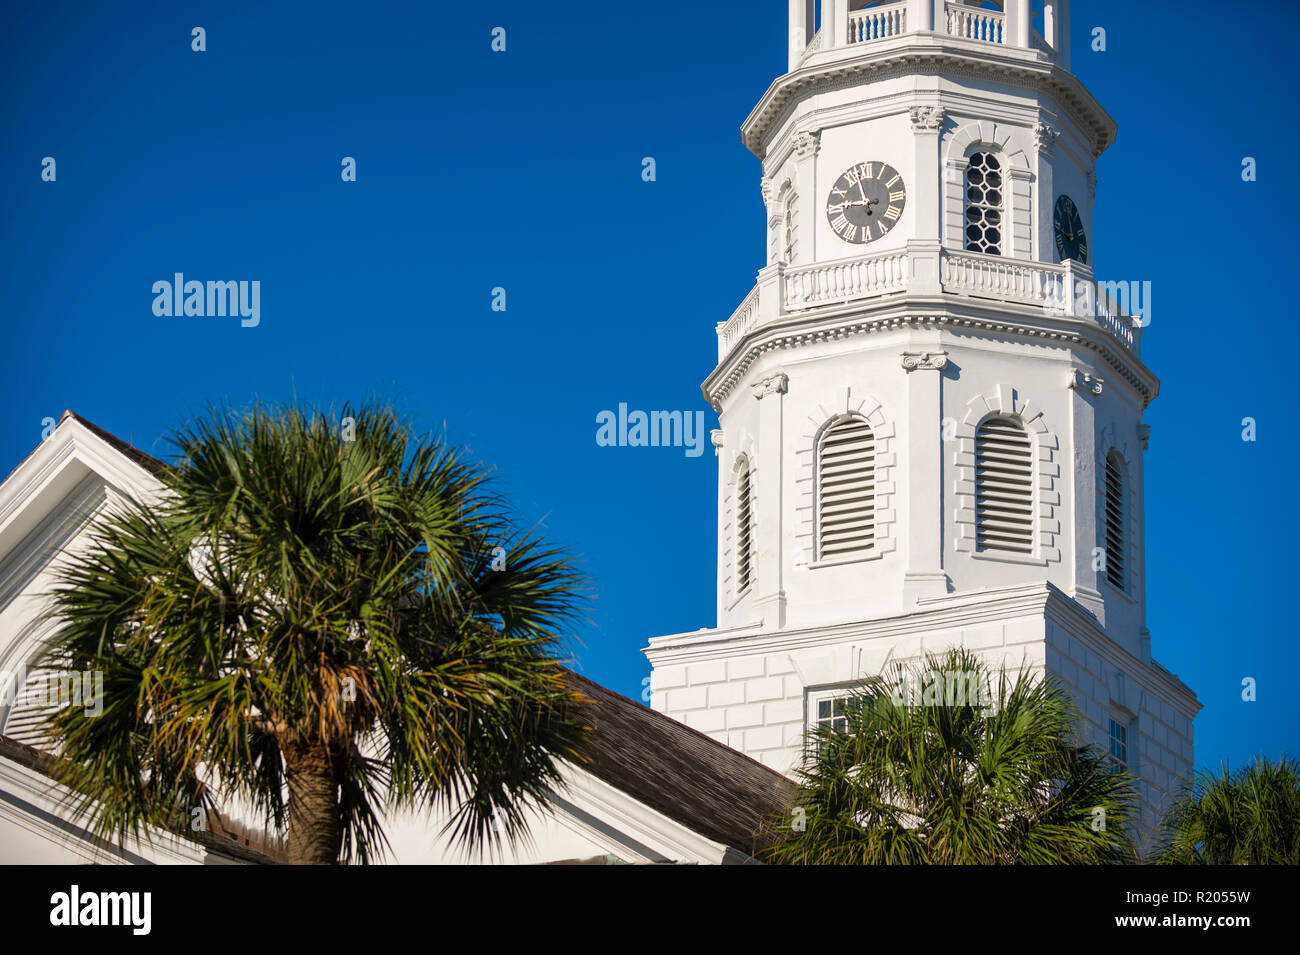 Sunny scenic detail view of classical Southern church architecture with palmetto palms under bright blue sky in Charleston, South Carolina, USA Stock Photo